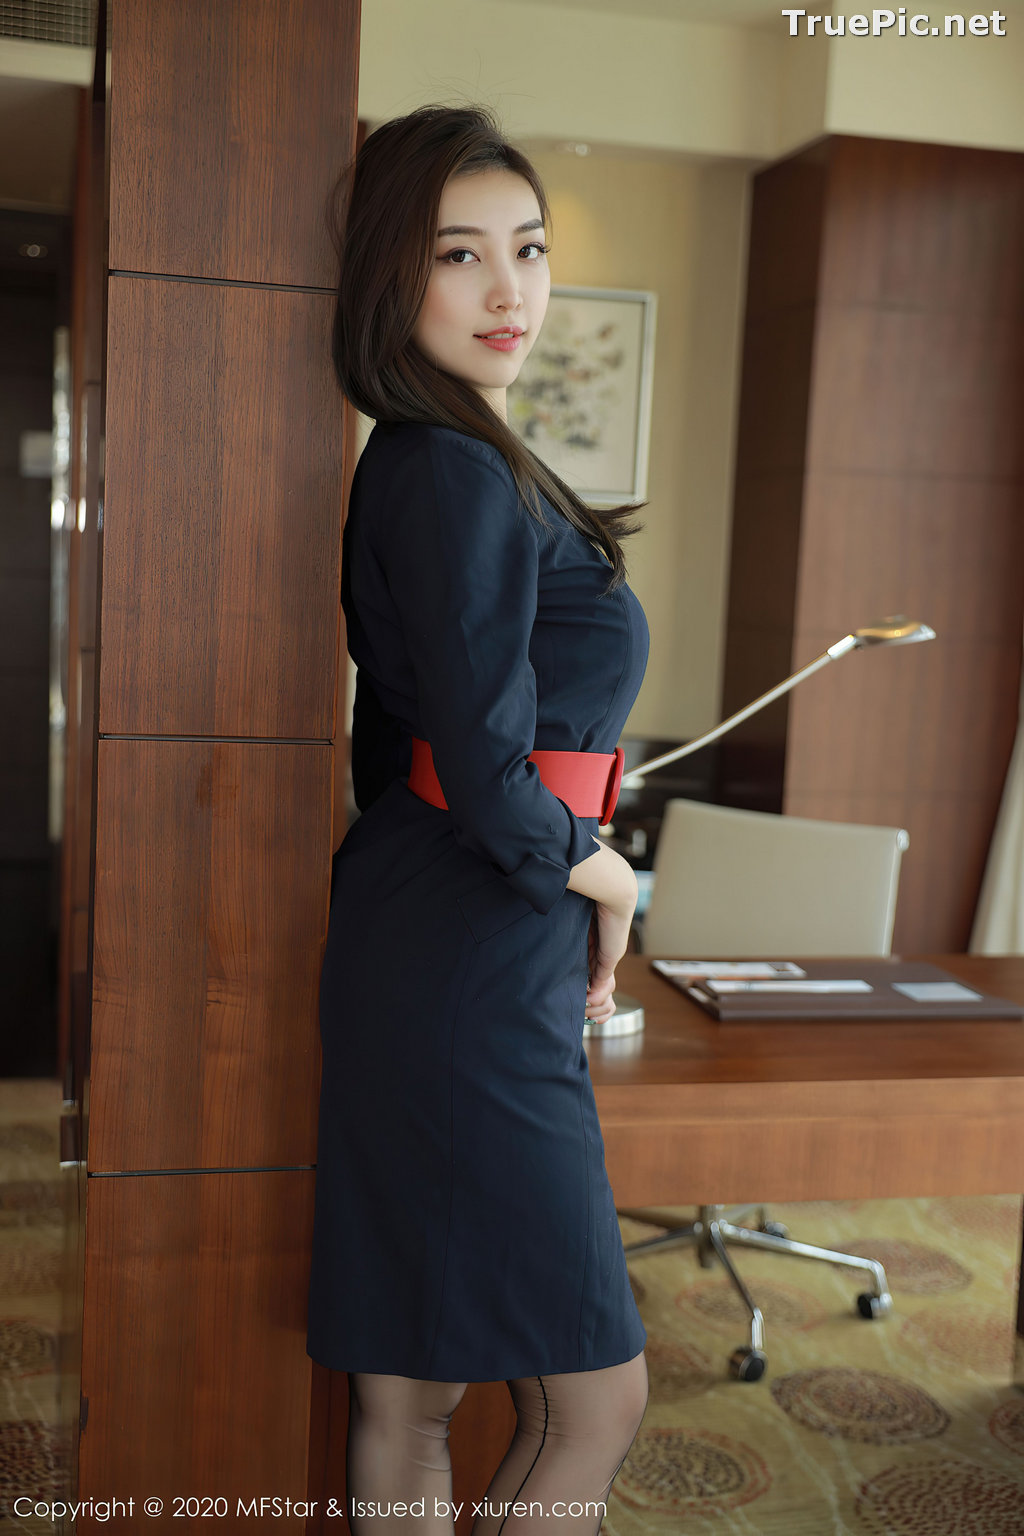 Image MFStar Vol.404 – Chinese Model – Zheng Ying Shan (郑颖姗) – Sexy Office Girl - TruePic.net - Picture-18